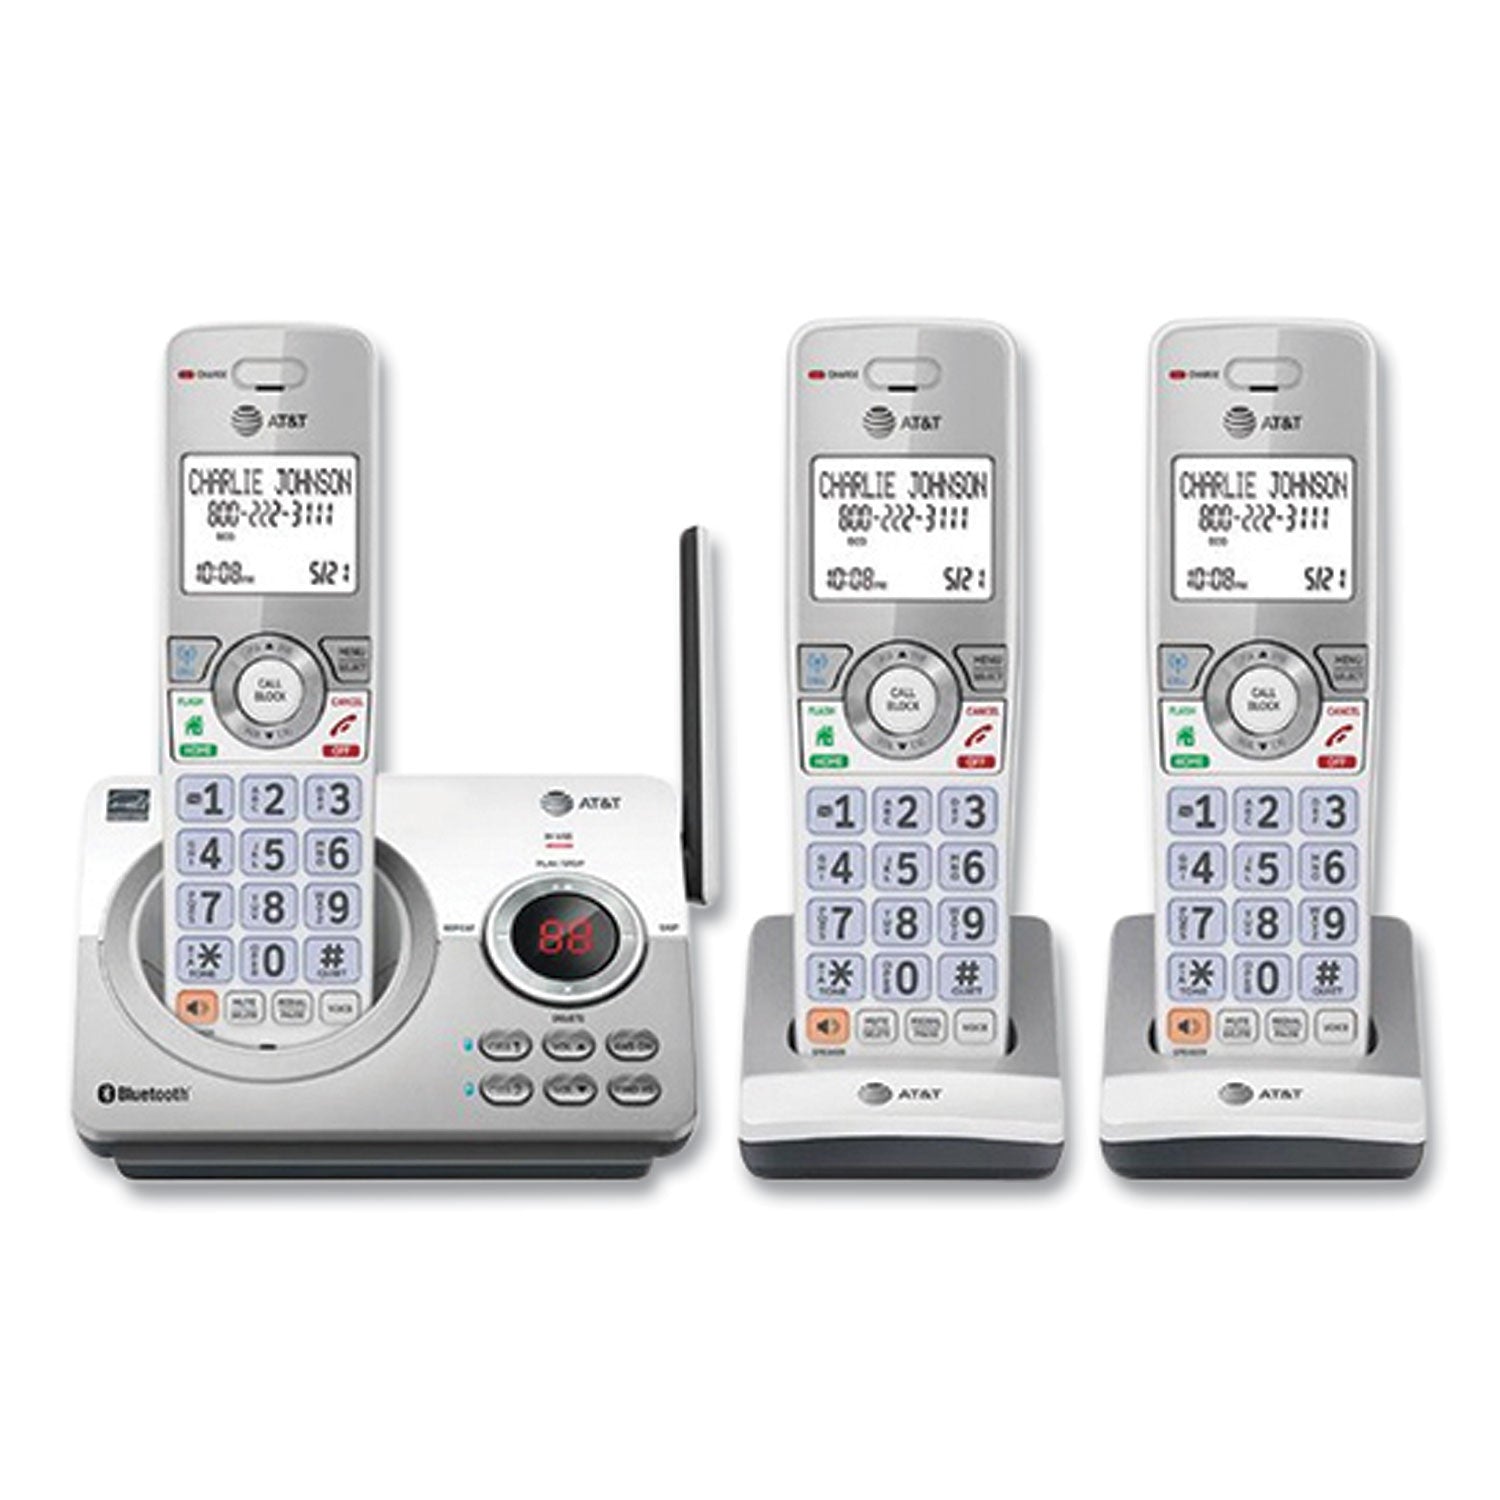 connect-to-cell-dl72310-cordless-telephone-base-and-2-additional-handsets-white-silver_attdl72310 - 2